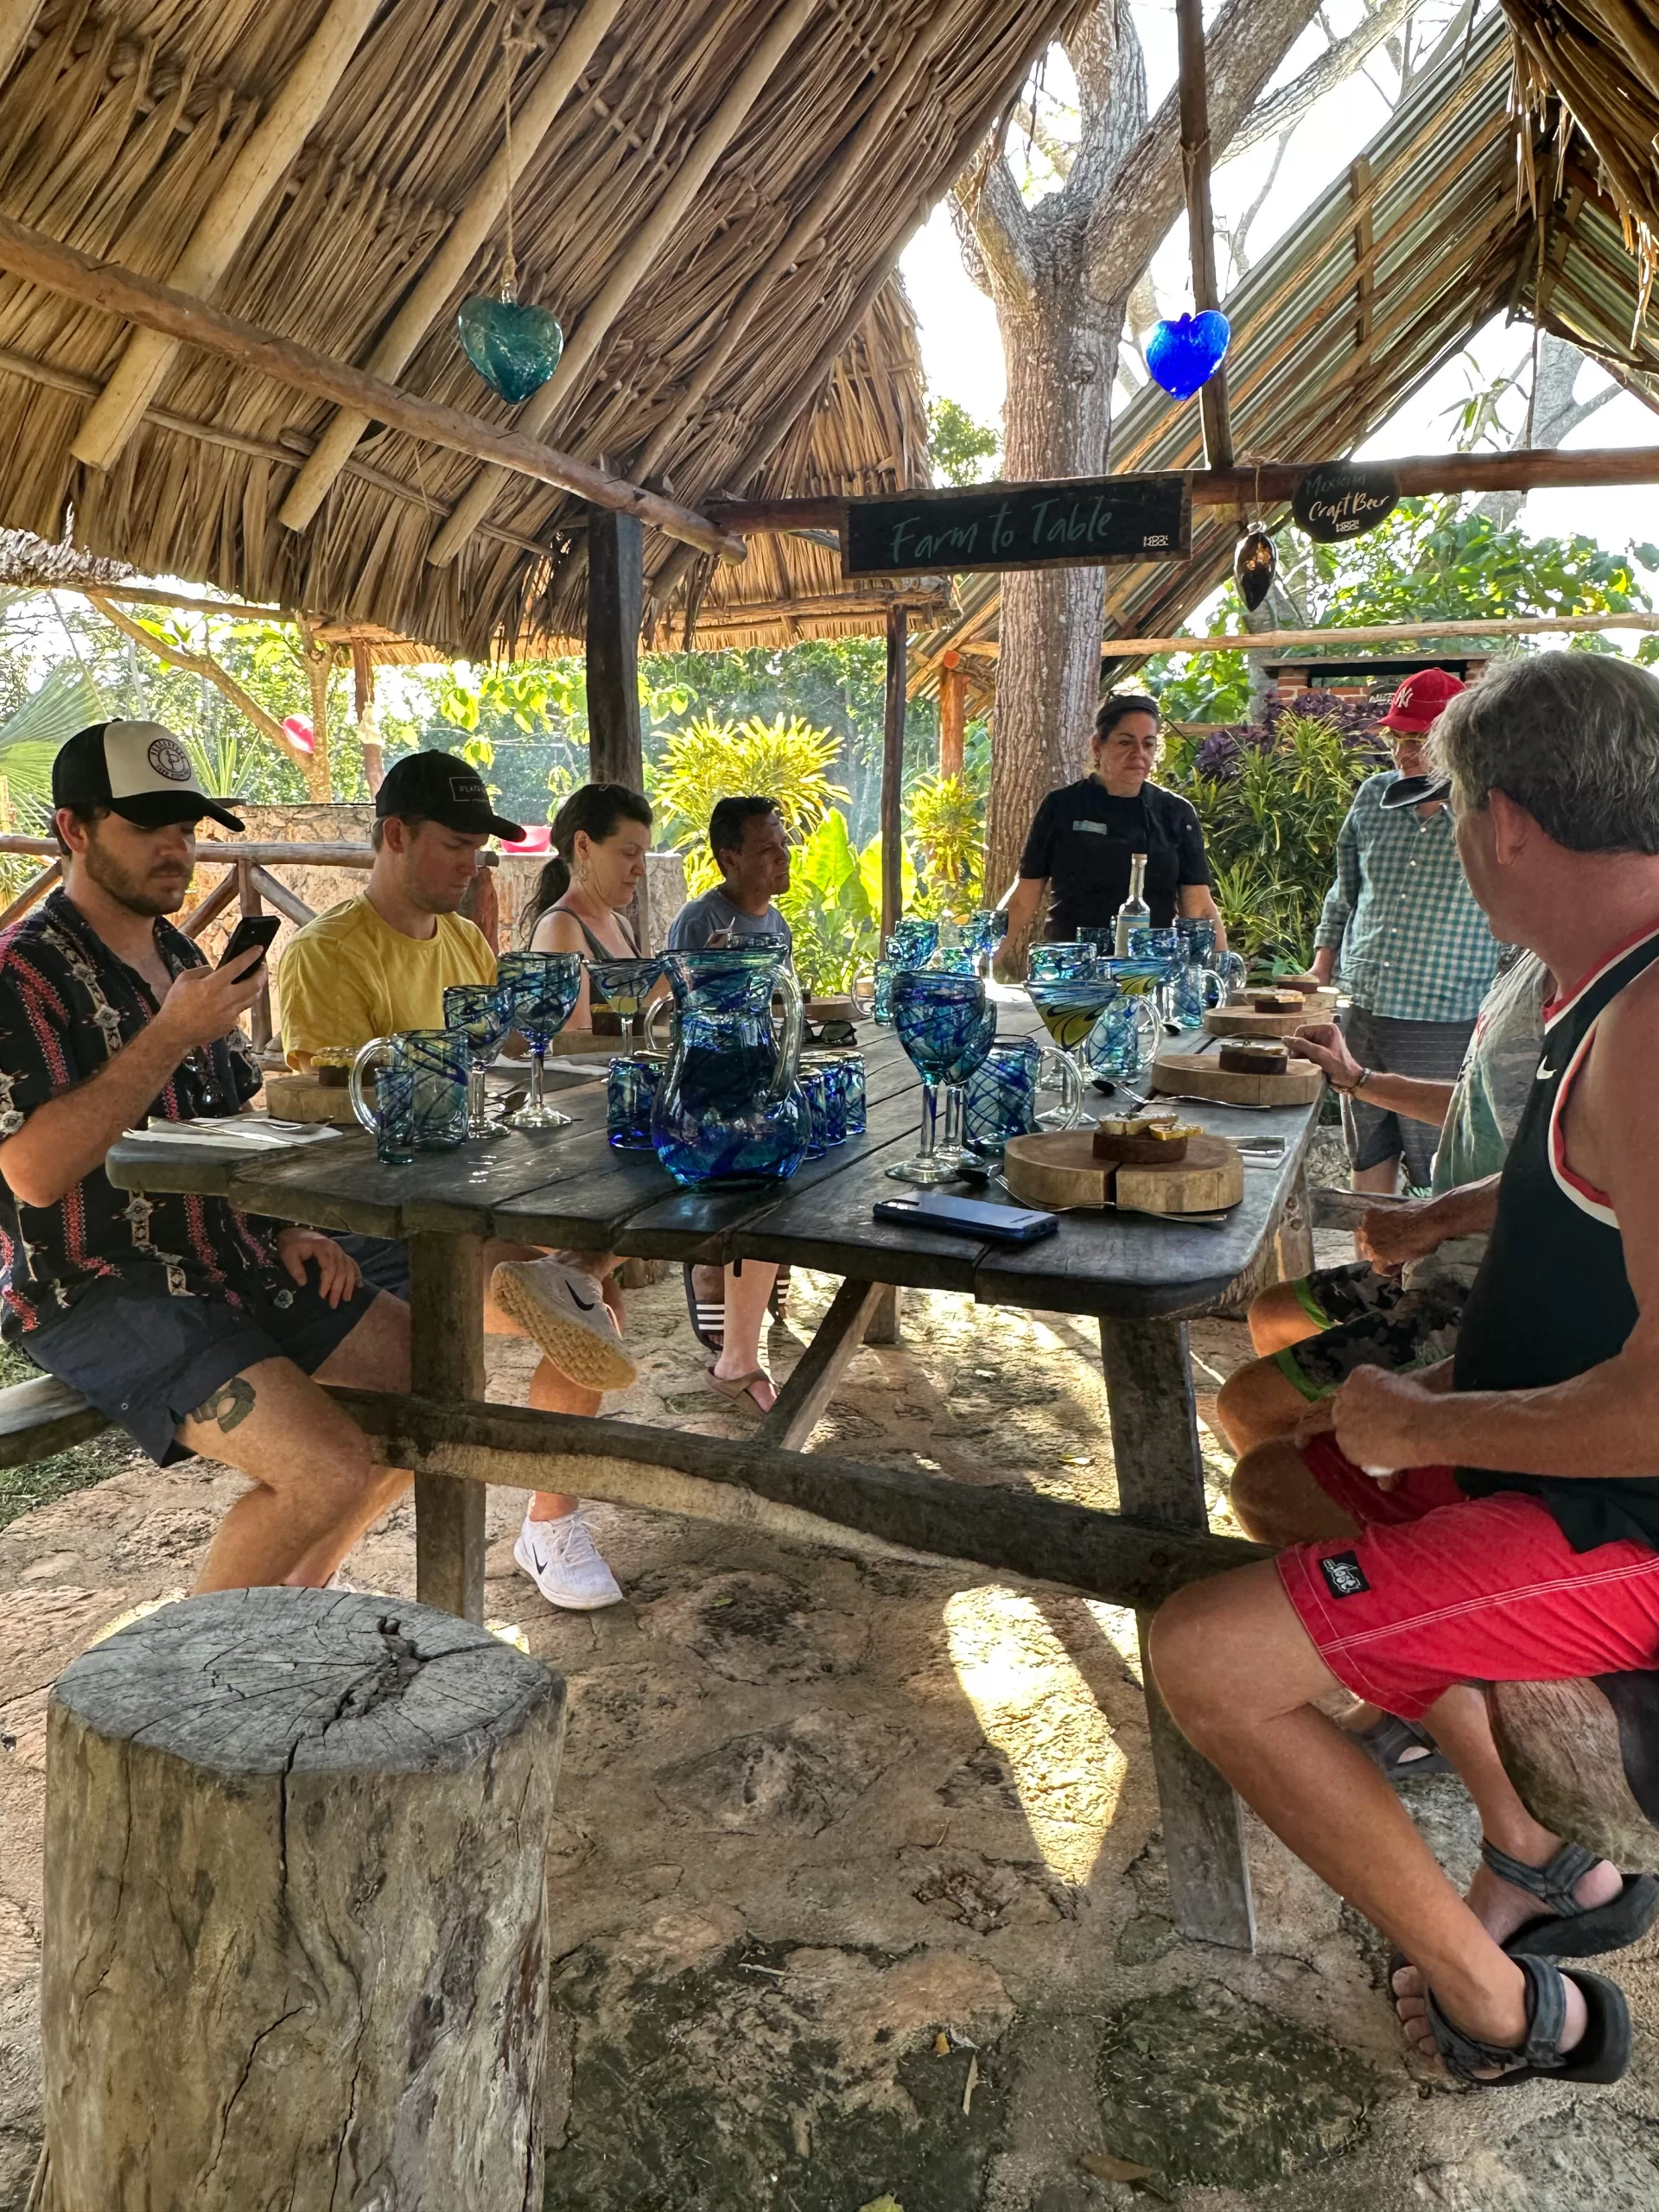 A group of five visitors sitting at a picnic table filled with blue glasswear and speaking with Chef Karla Romo.